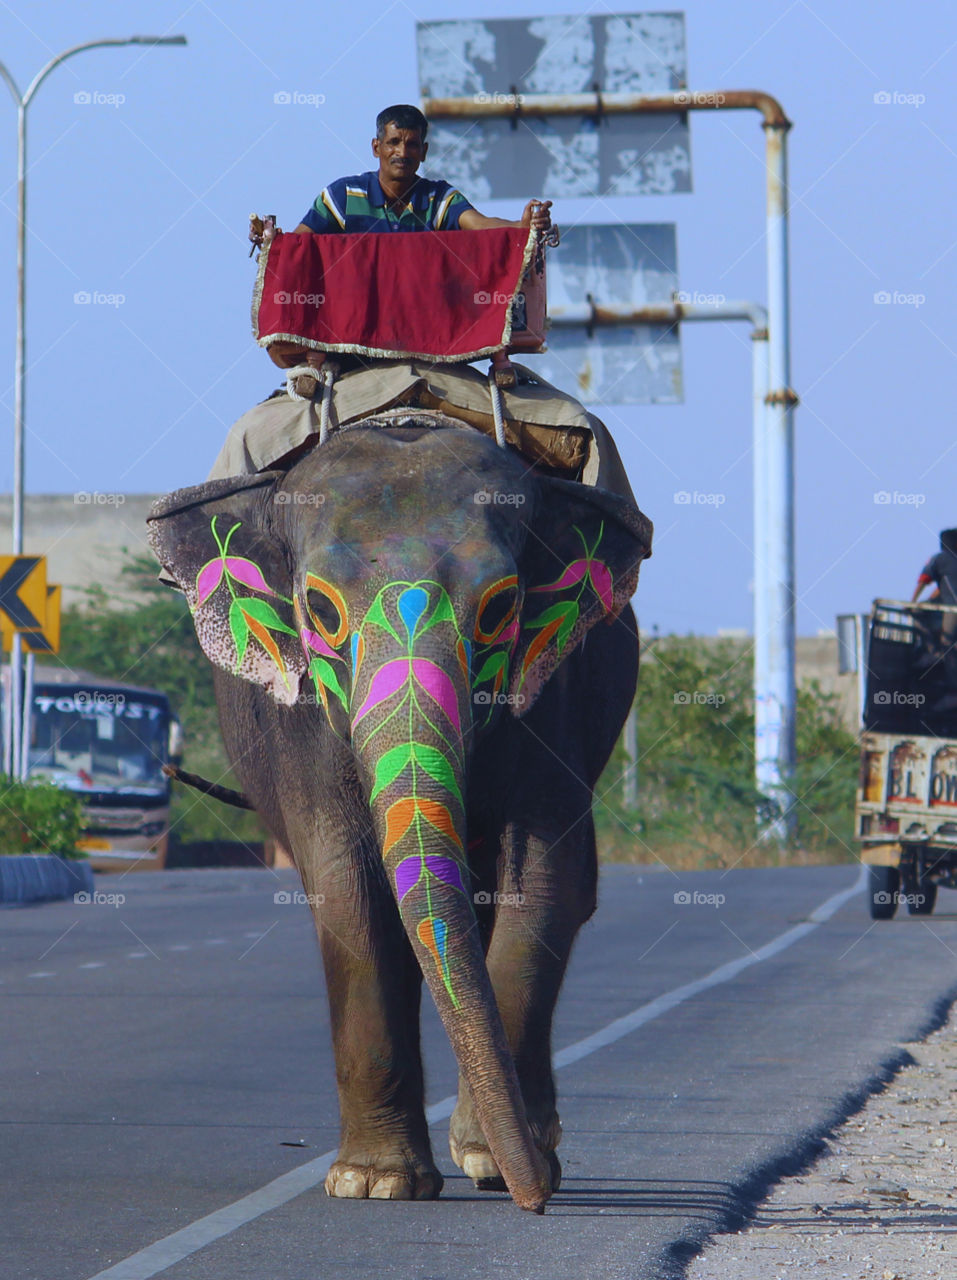 our elephant driver going to home